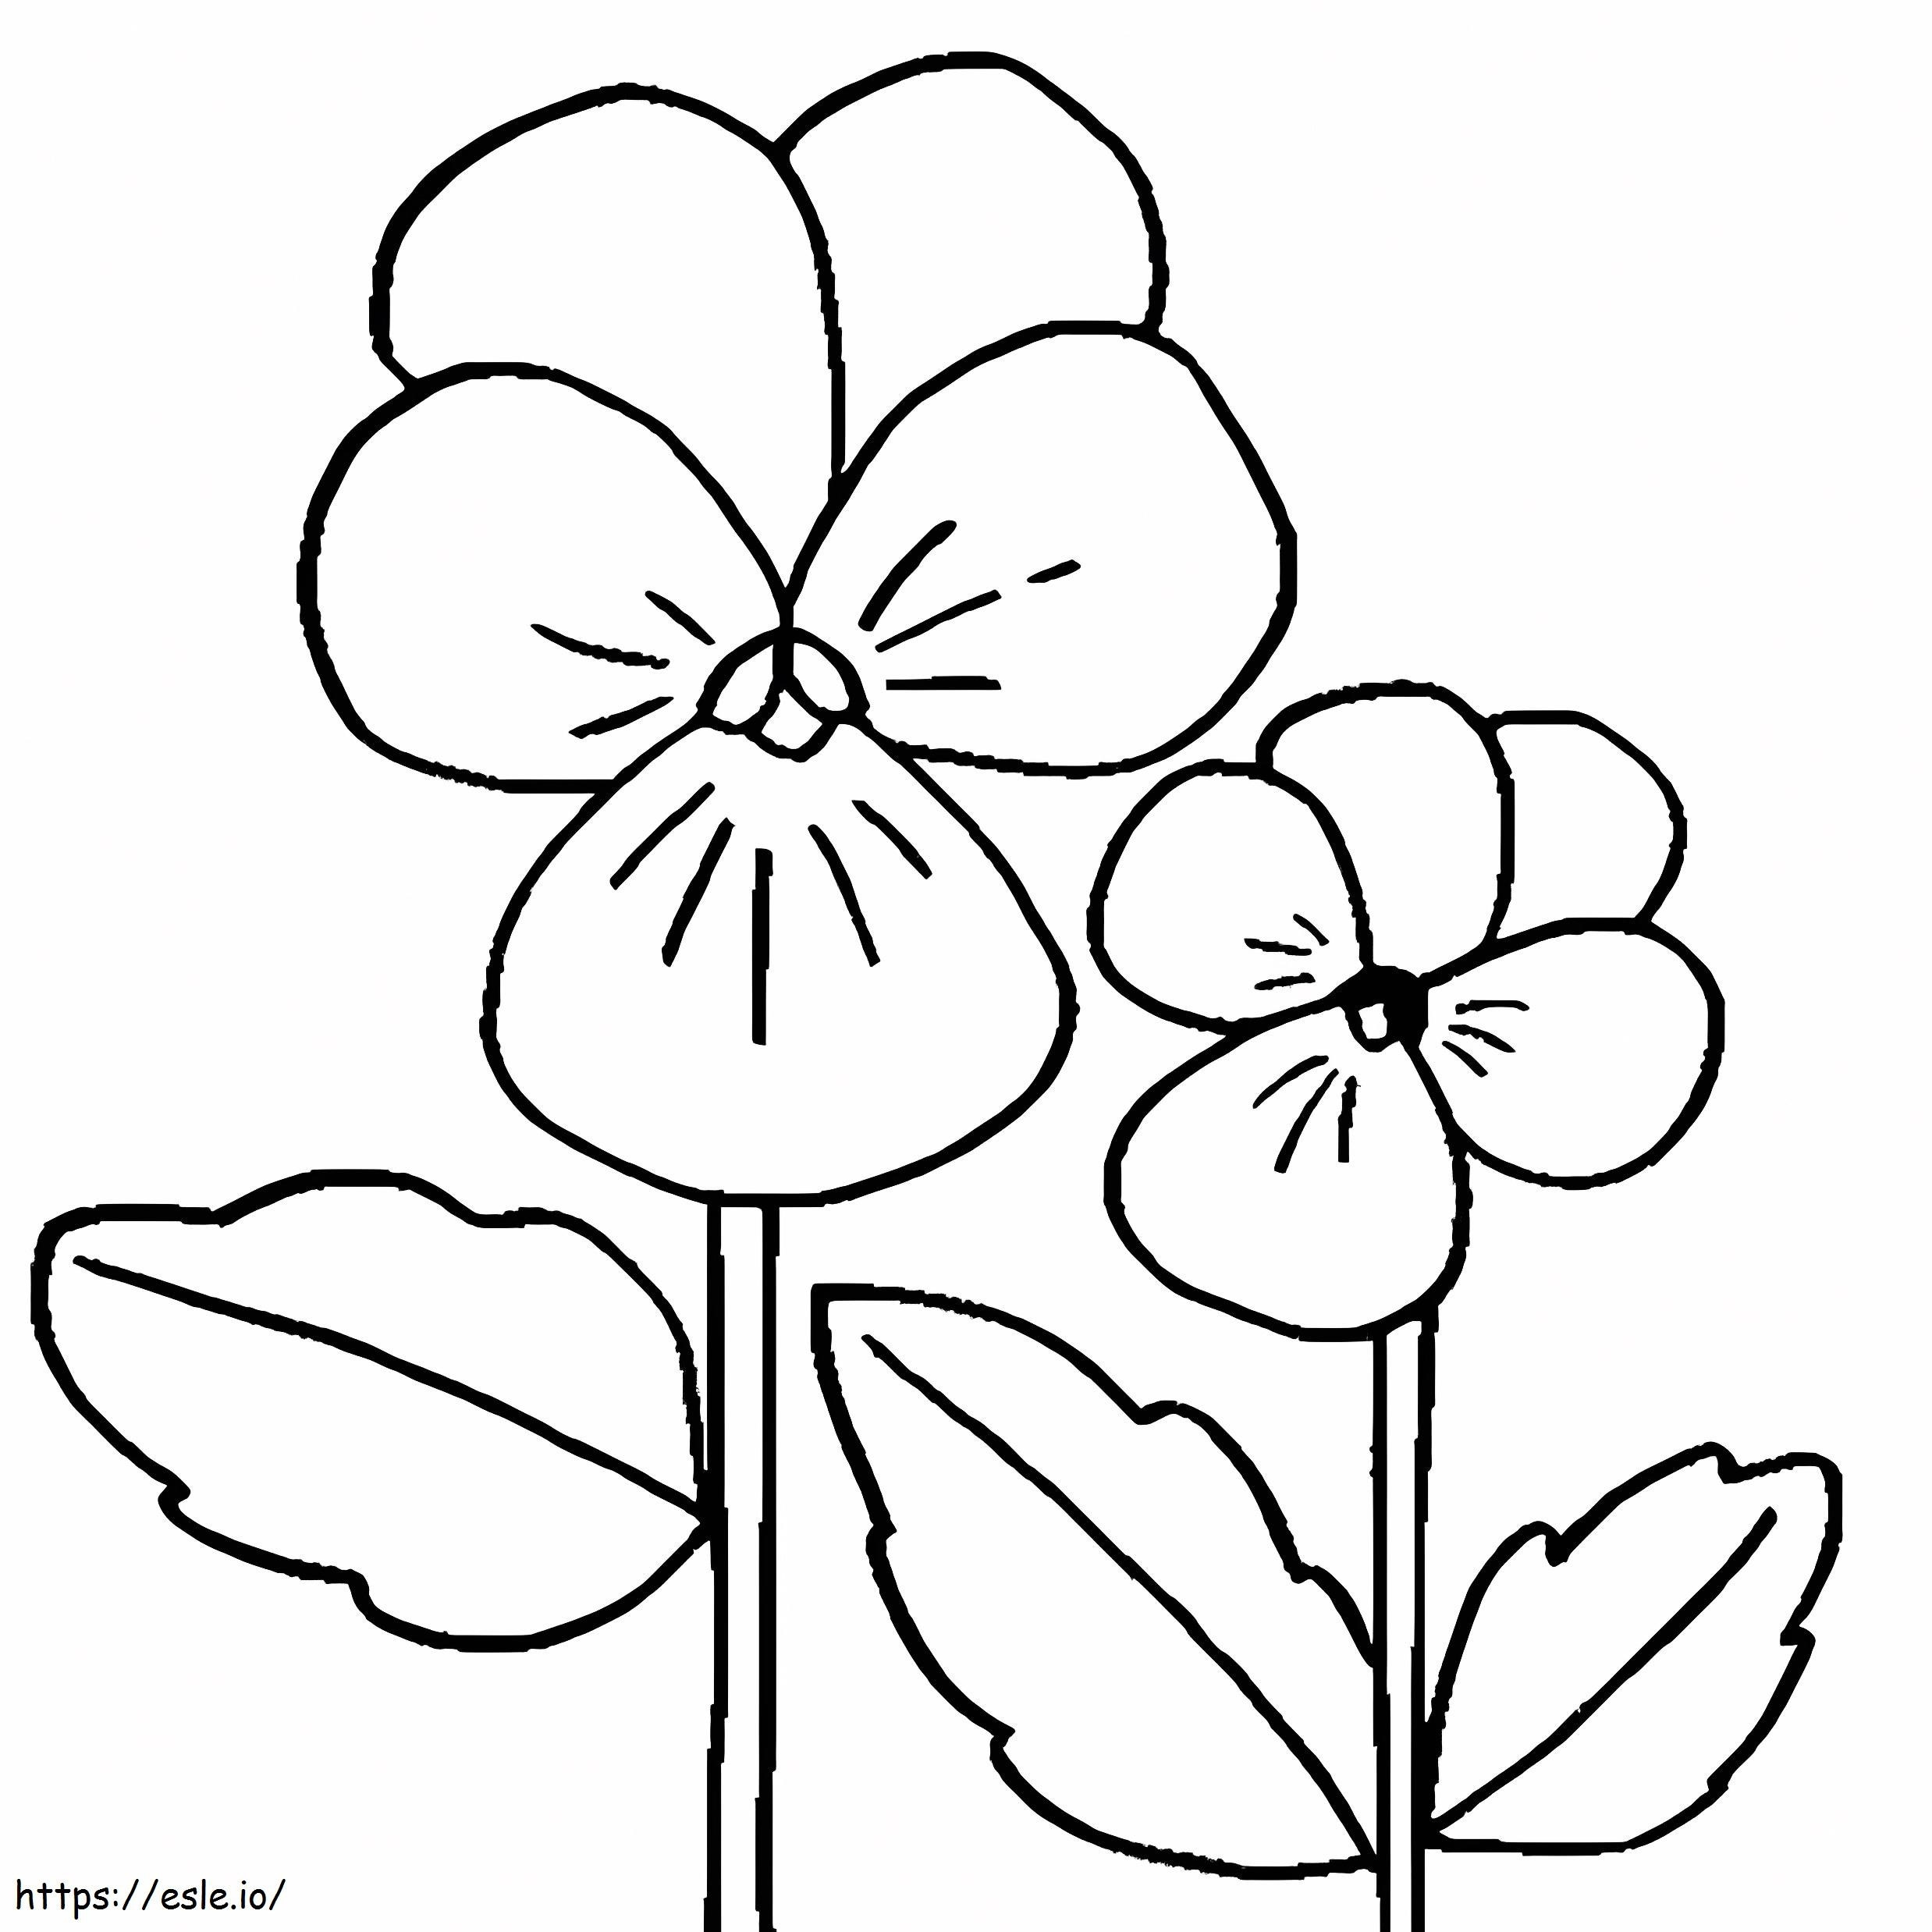 Printable Pansy coloring page